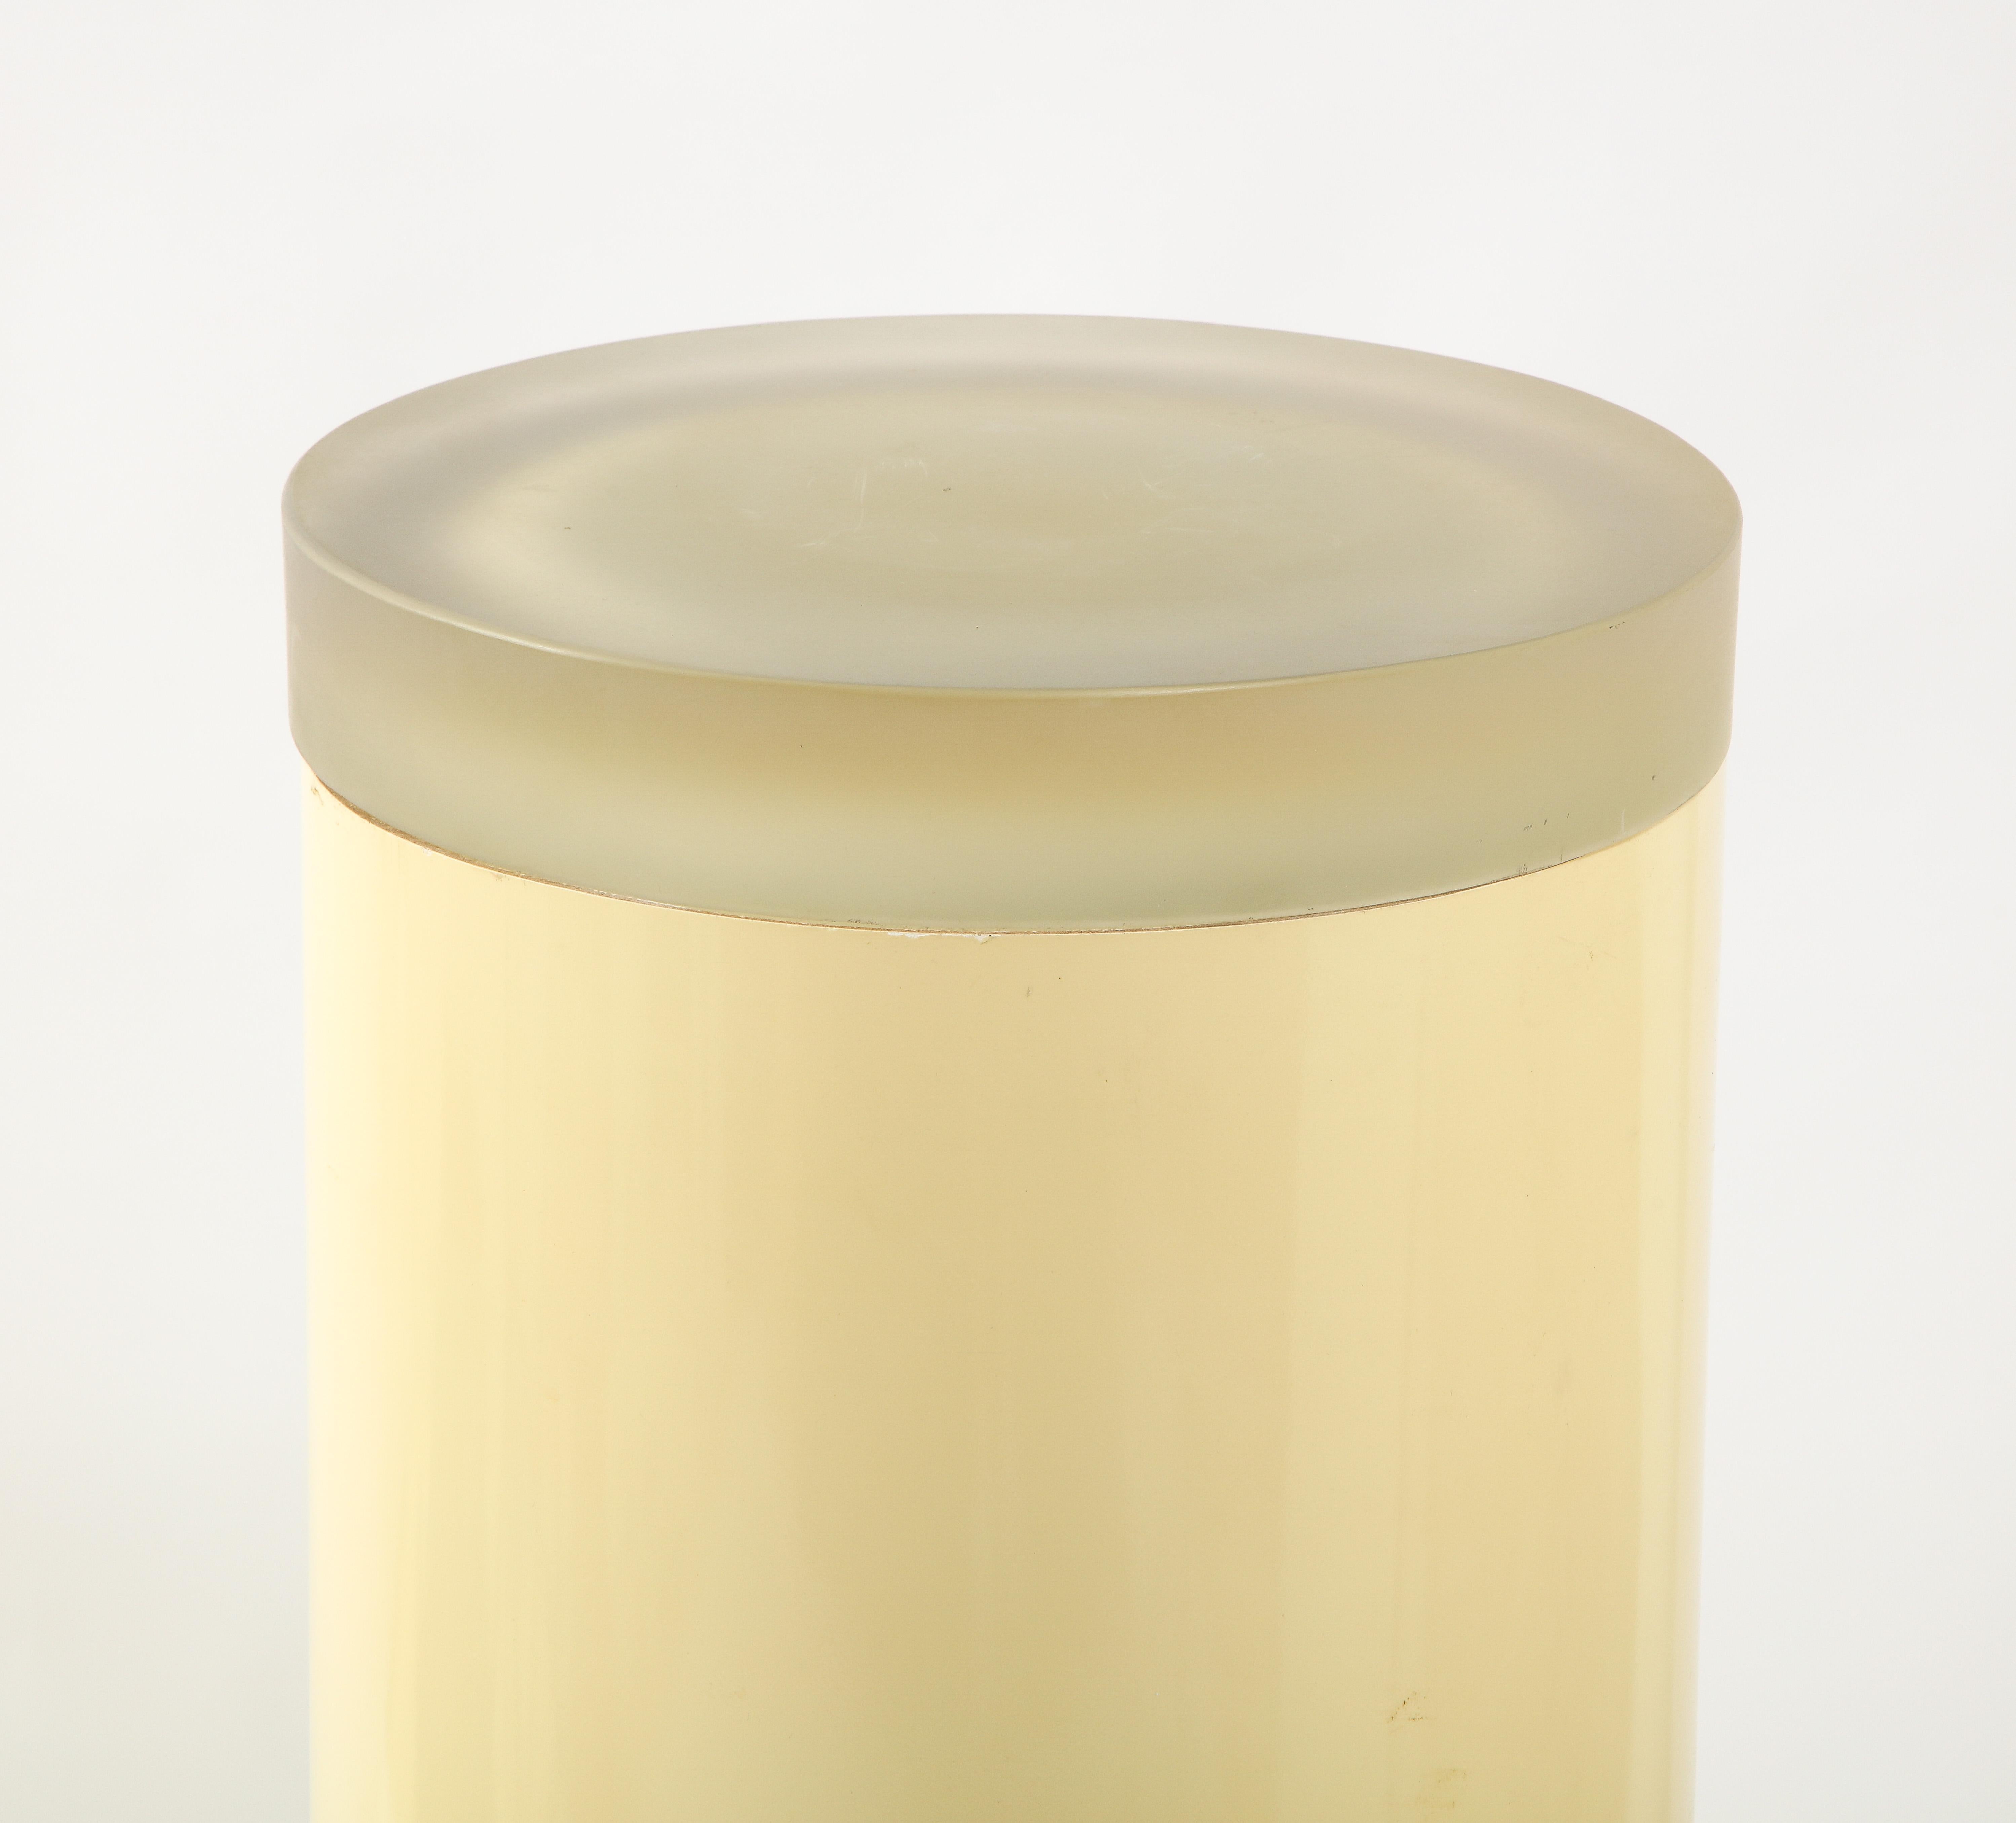 Round acrylic pedestal with a cast resin top, the light concealed within the pedestal makes the resin glow warmly. It can be used to display art or as an accent light.